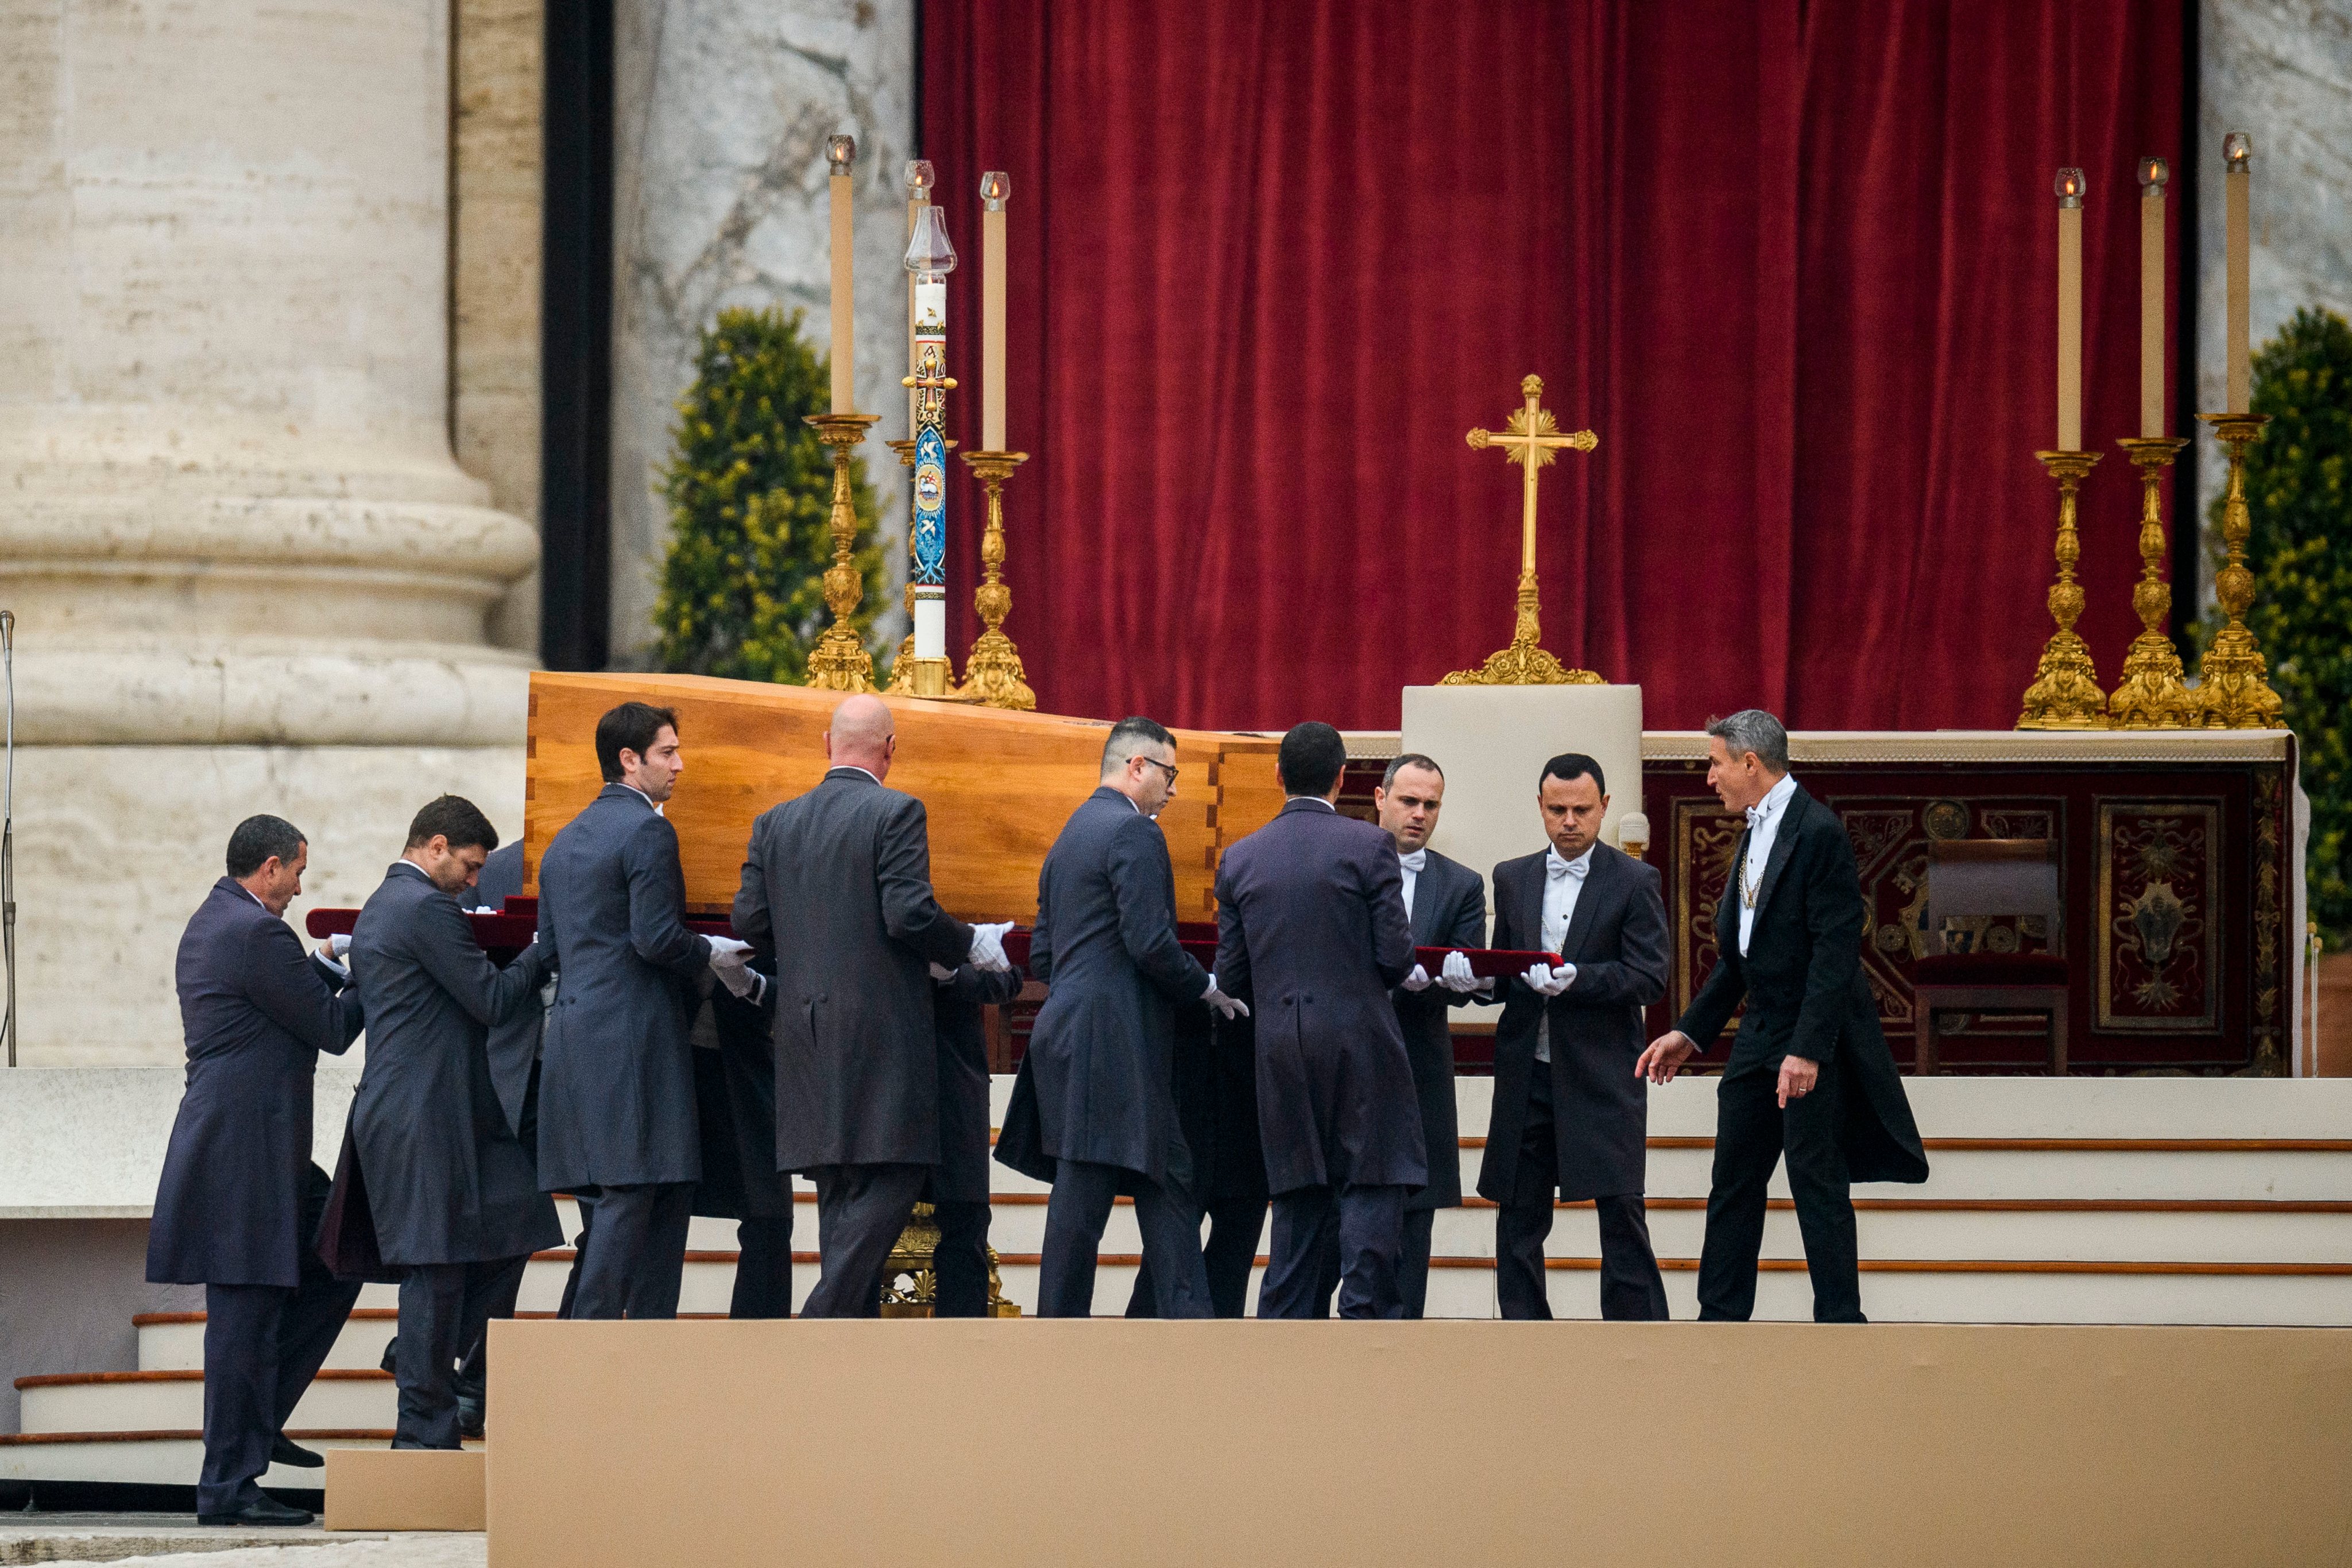 The Funeral Of Pope Emeritus Benedict XVI Takes Place In St Peter&#039;s Basilica